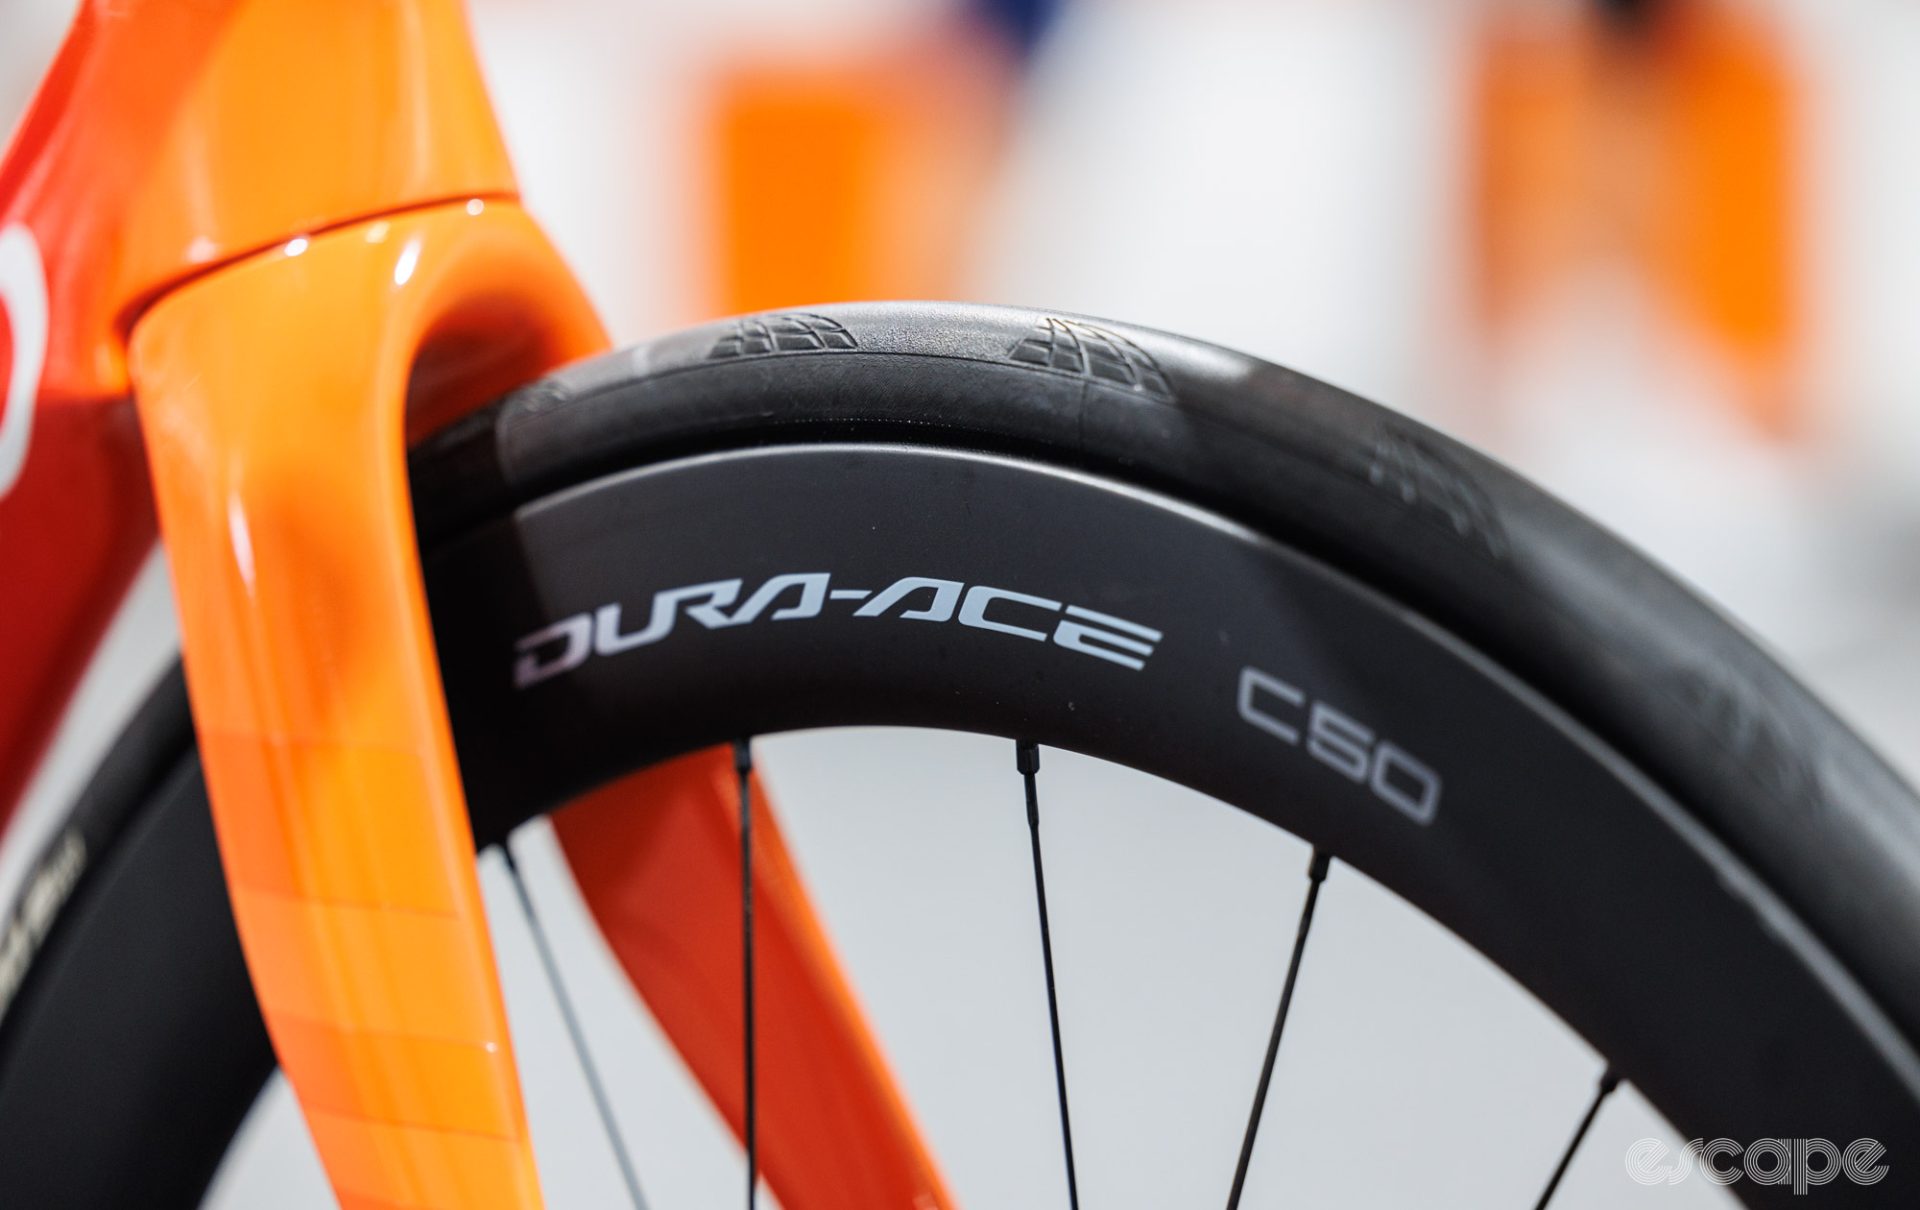 Dura-Ace C50 wheels and Continental tires.